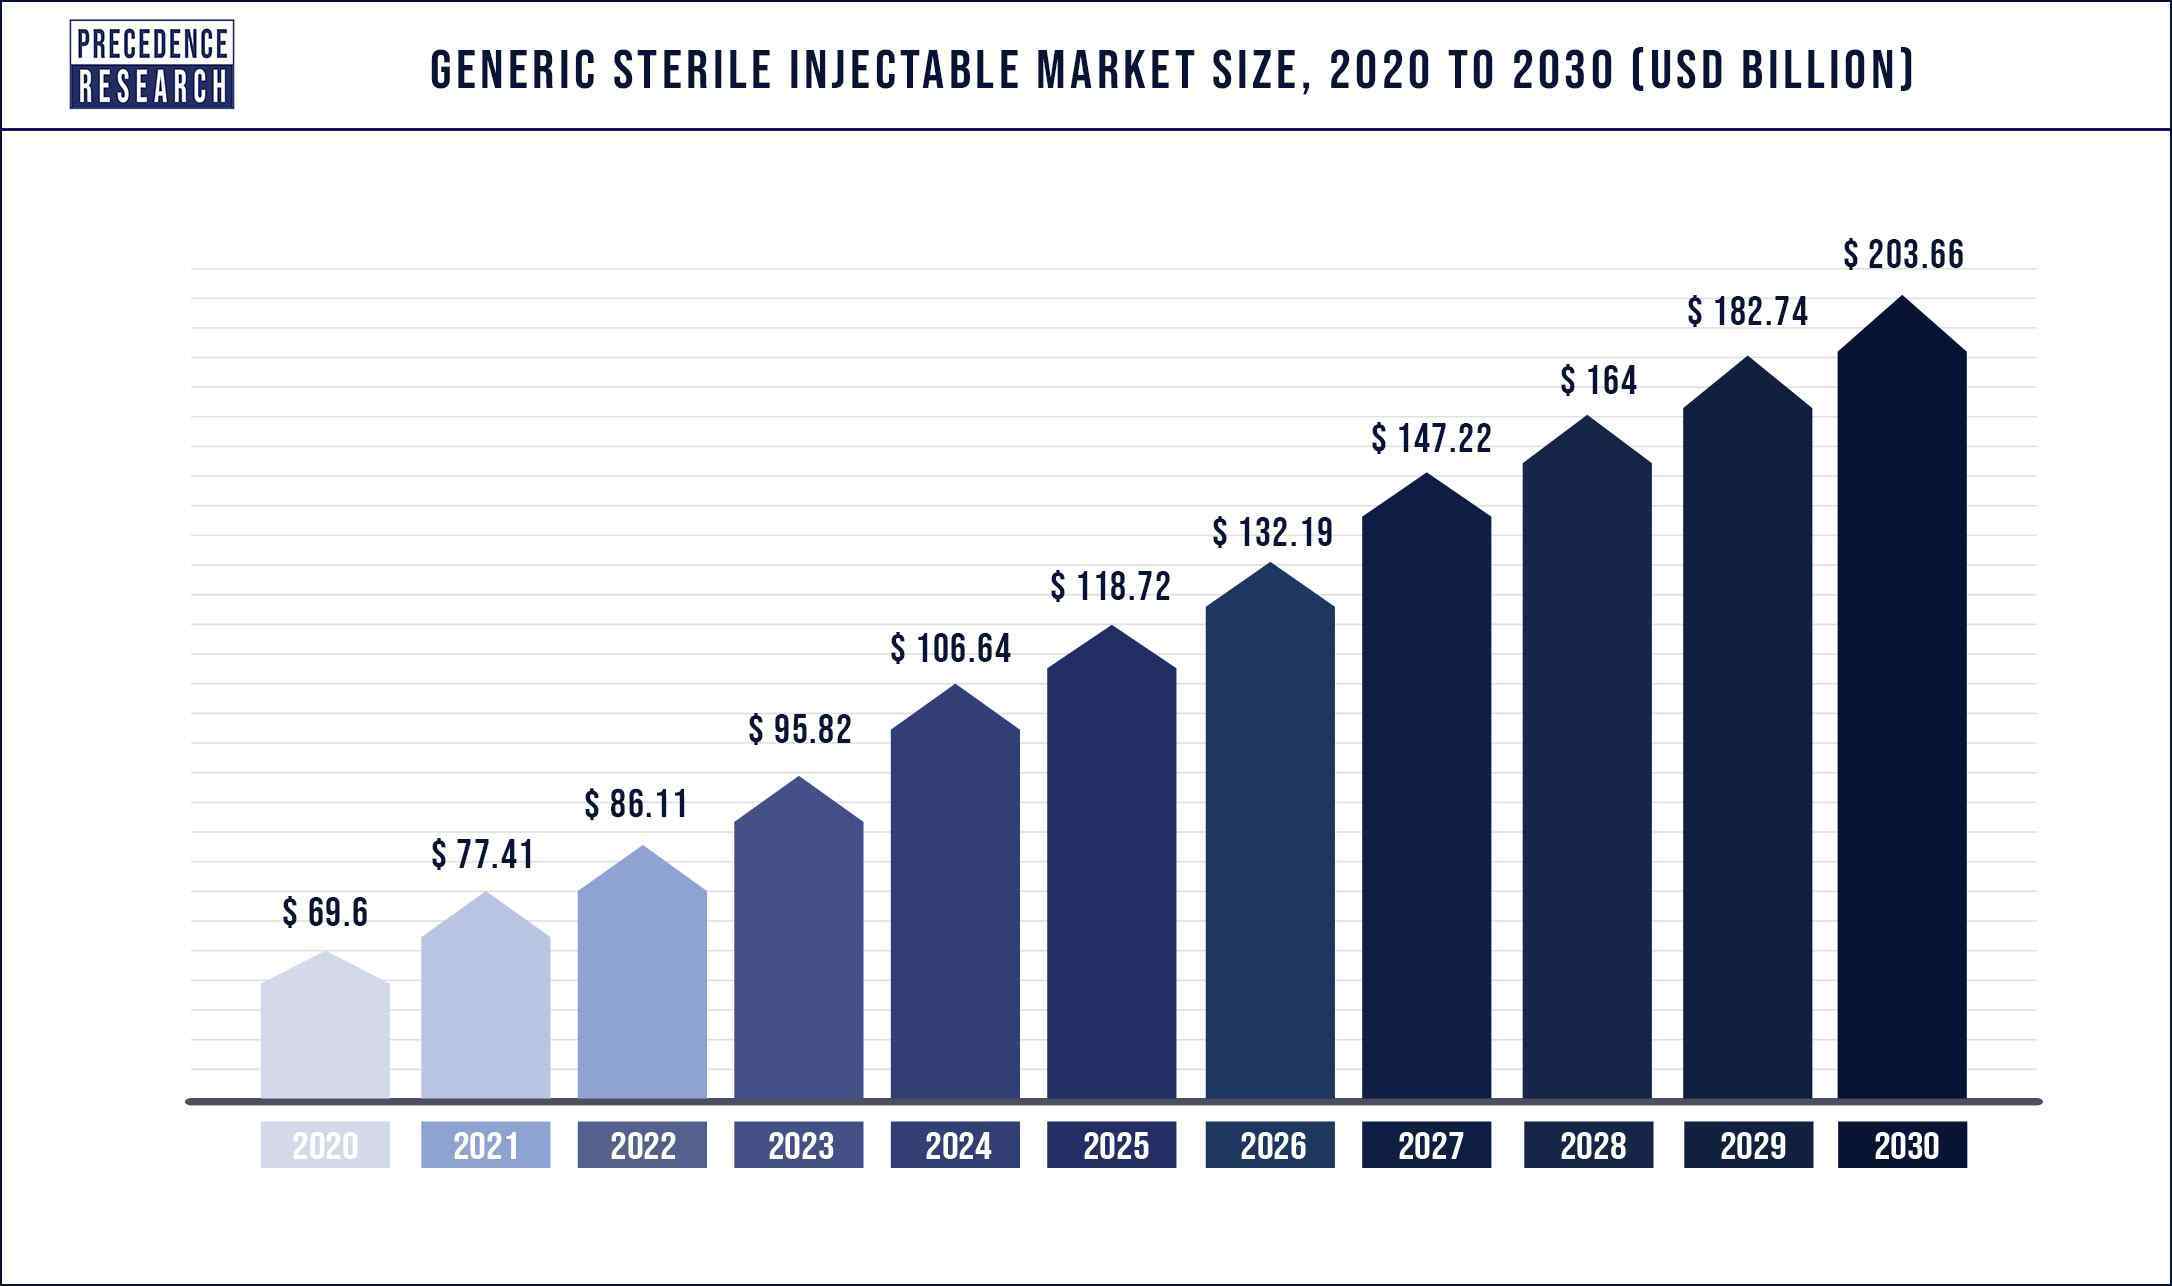 Generic Sterile Injectables Market Size 2020 to 2030